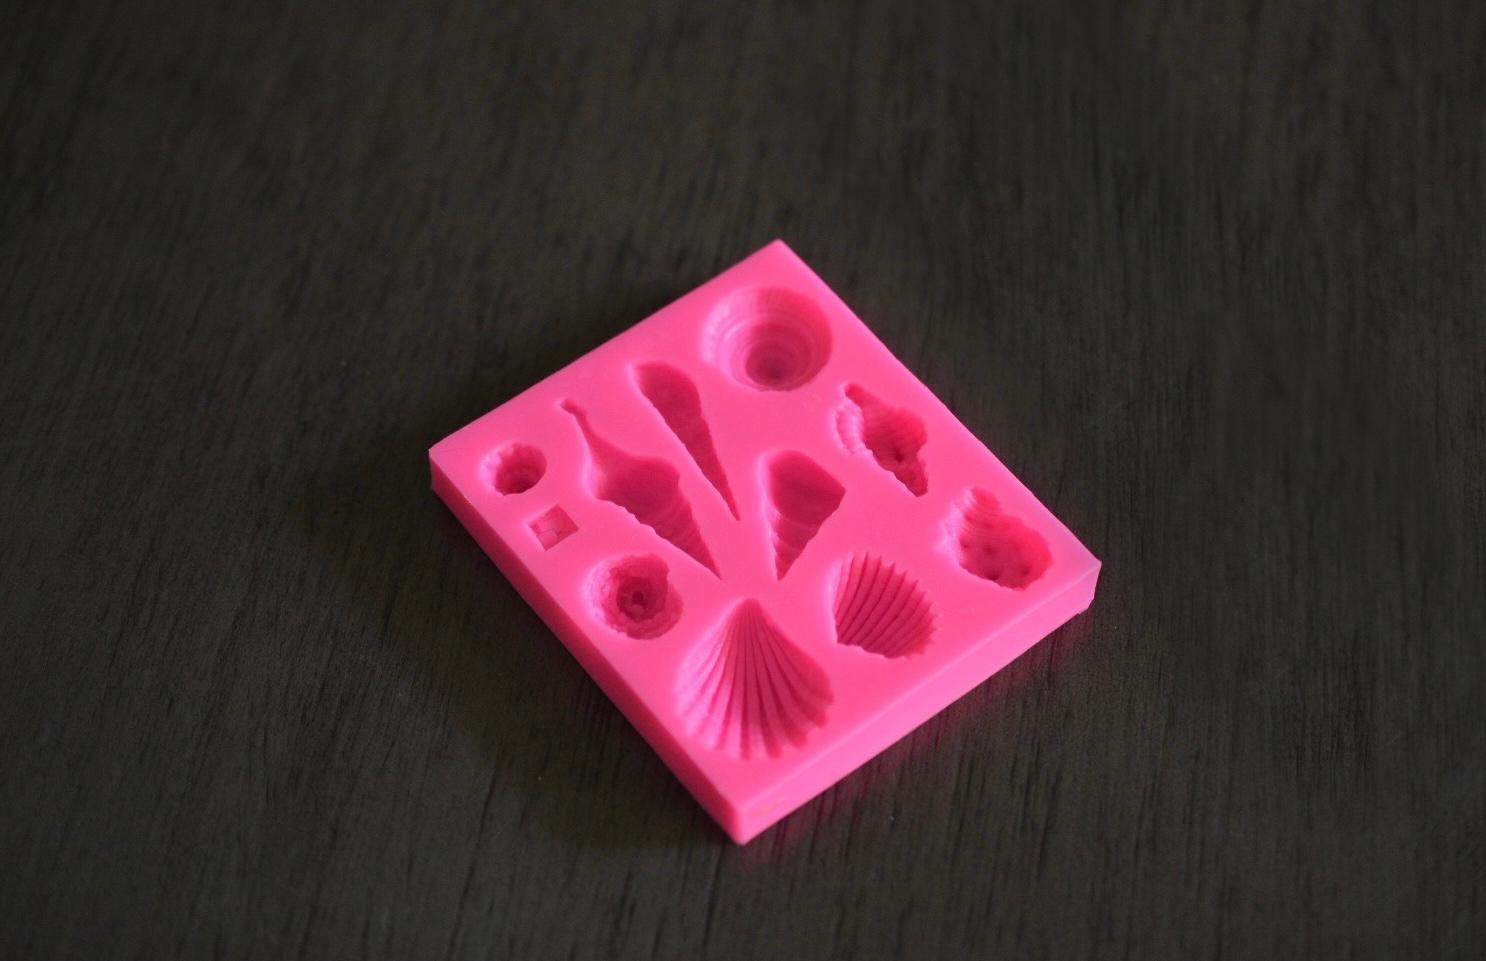 A top down view of a square soap mold with seashell designs rests on a wooden surface. The mold is pink.